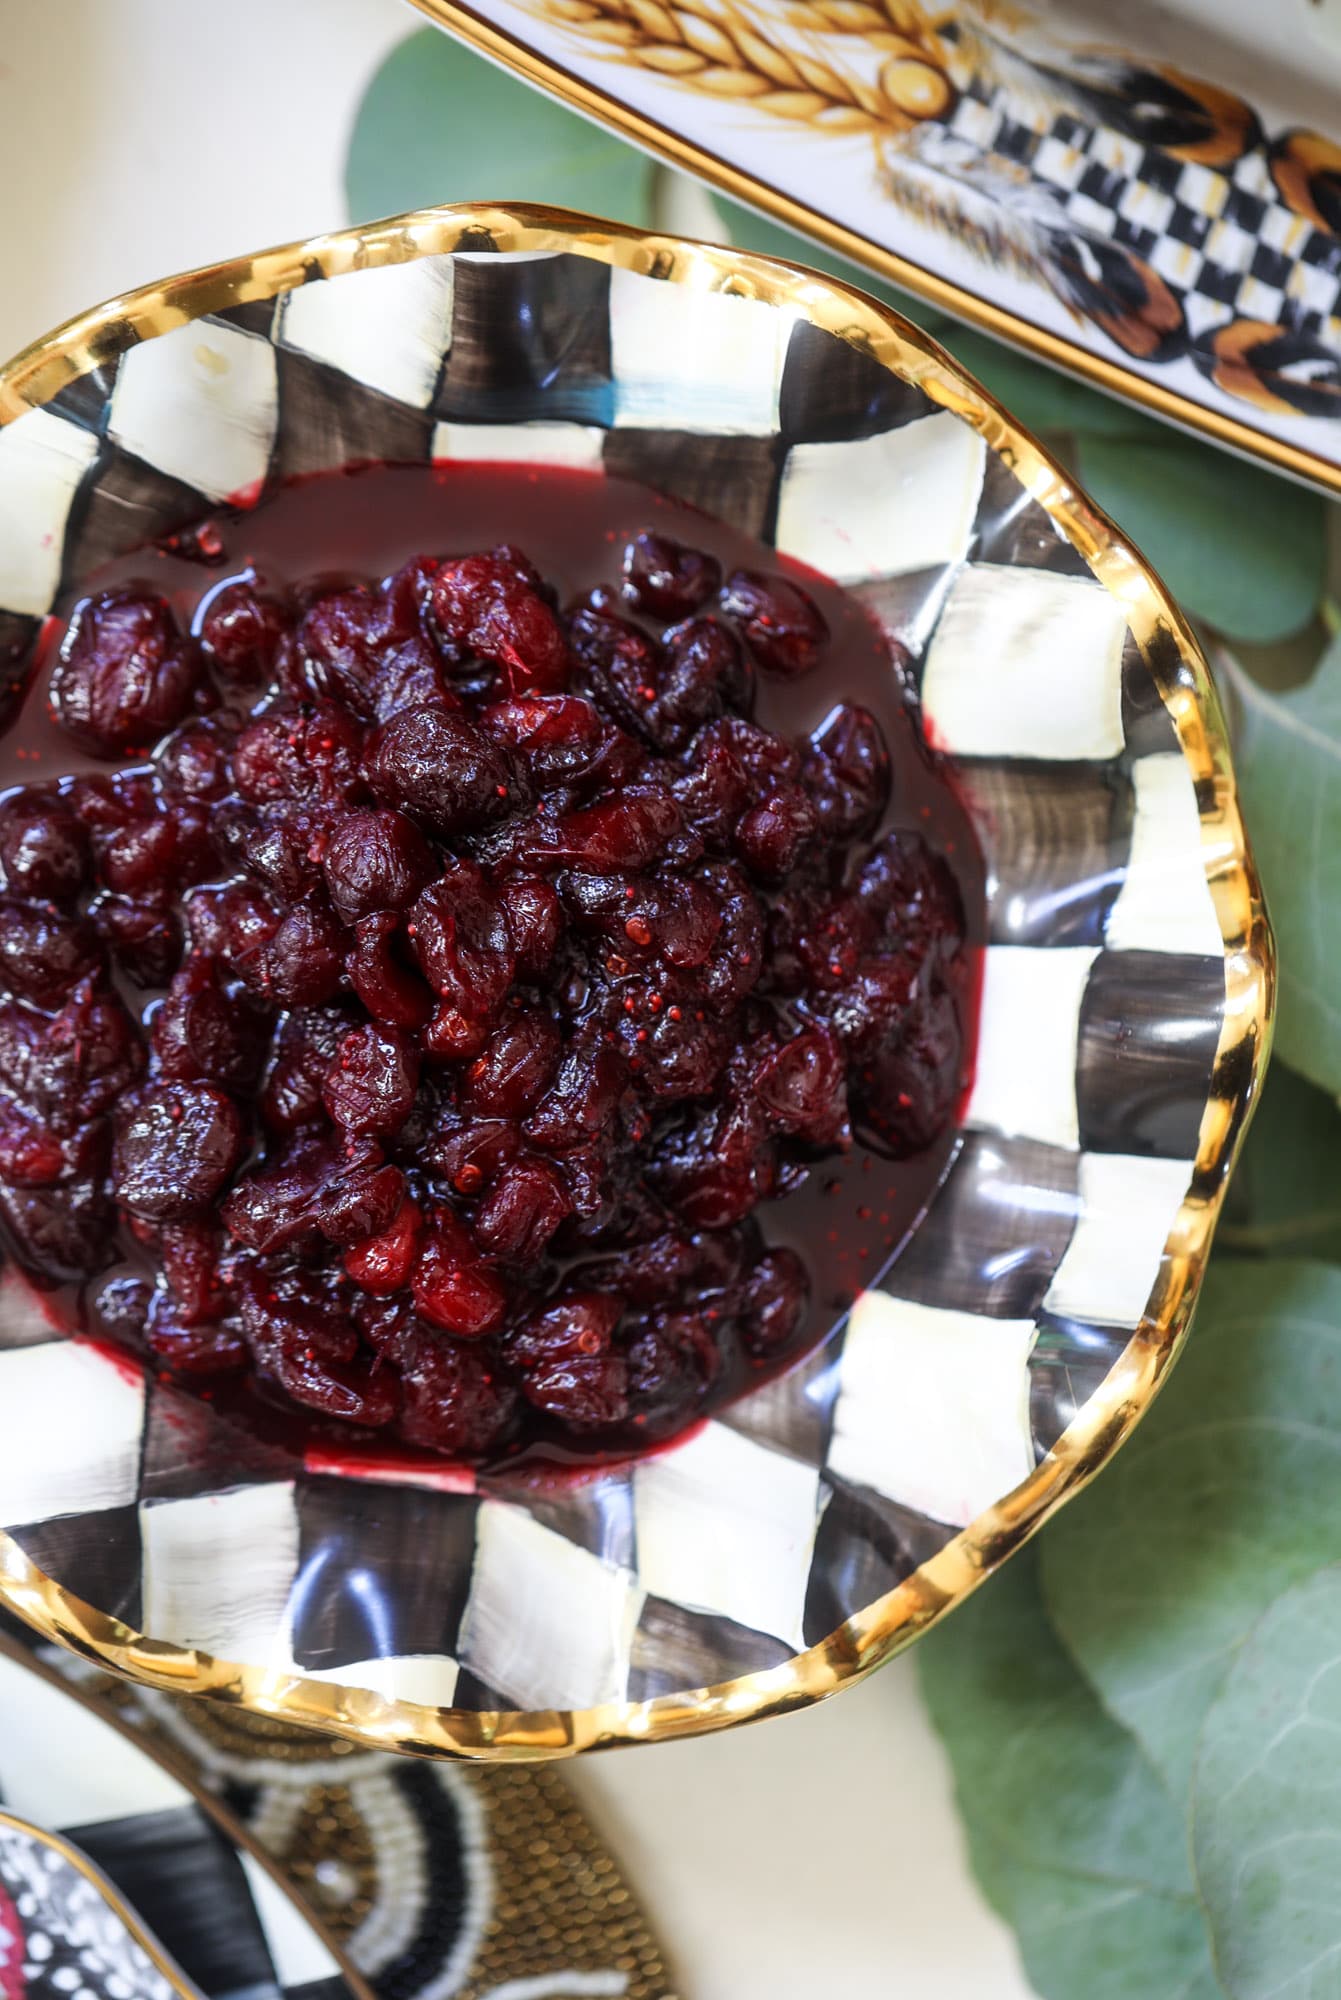 This cranberry chutney is not your traditional Thanksgiving side dish! Chipotle peppers and adobo sauce give this cranberry chutney a little kick - a touch of heat that works so well with the sweet. As a side or spread on sandwiches, it's perfect for the holidays! I howsweeteats.com #cranberry #chutney